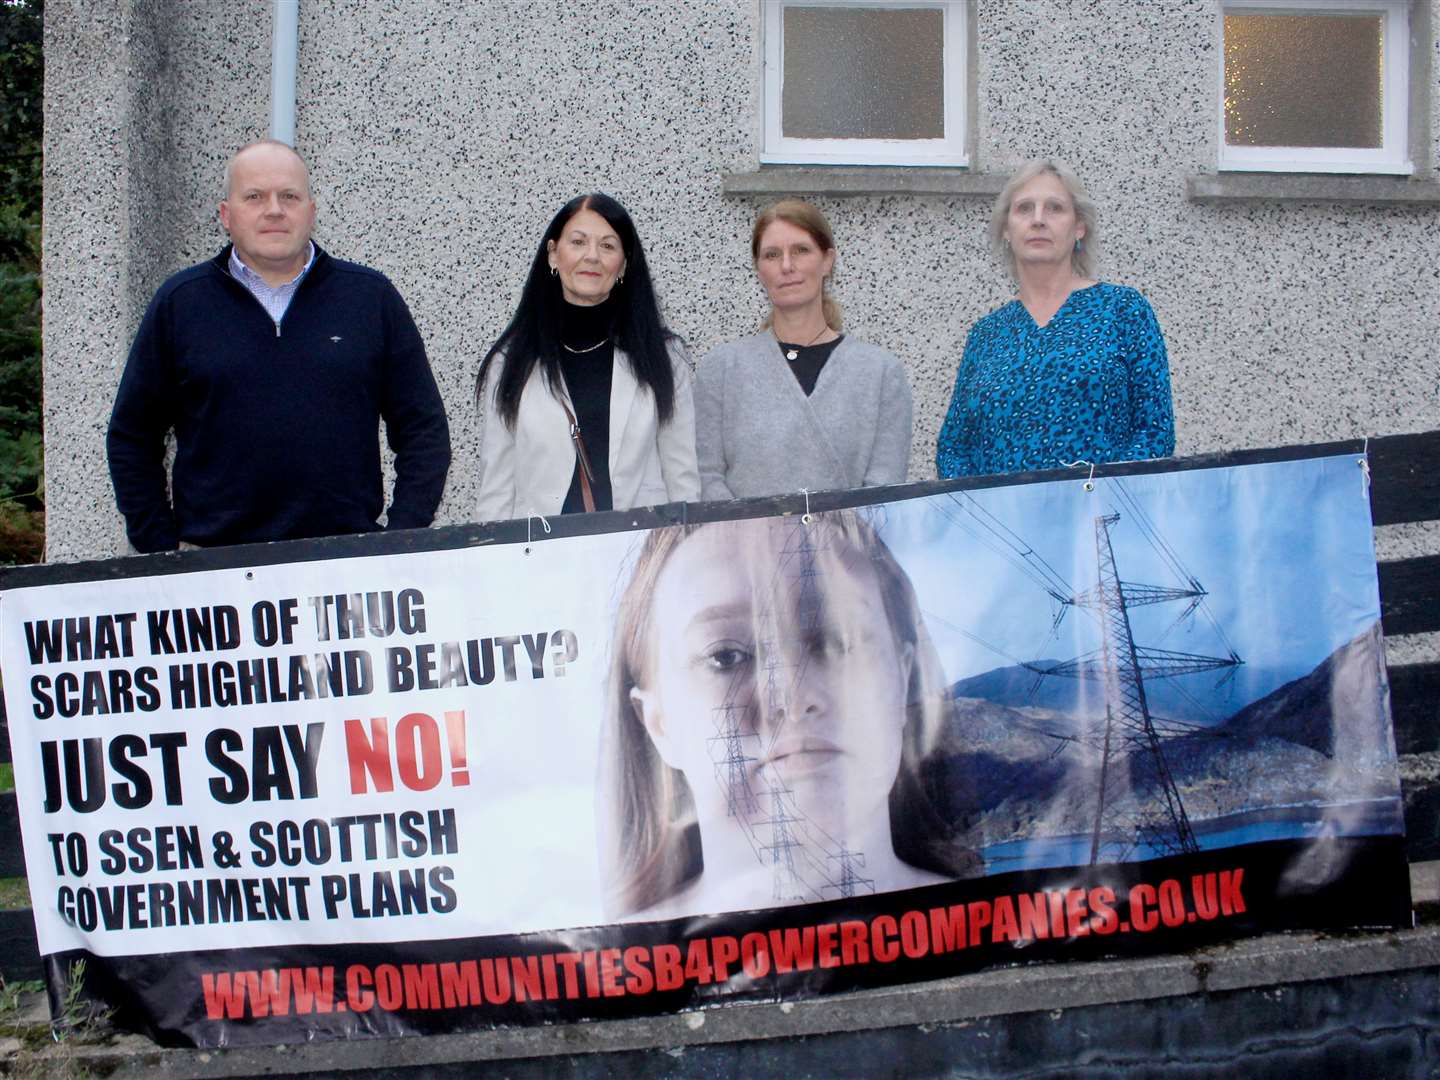 Outside the community hall in Dunbeath before a public meeting held in September last year are (from left) Angus MacInnes, chairman of Berriedale and Dunbeath Community Council, Lynn Parker, secretary of Dunbeath/Berriedale Community Say NO to Pylons, and Denise Davis and Lyndsey Ward from Communities B4 Power Companies. Picture: Alan Hendry